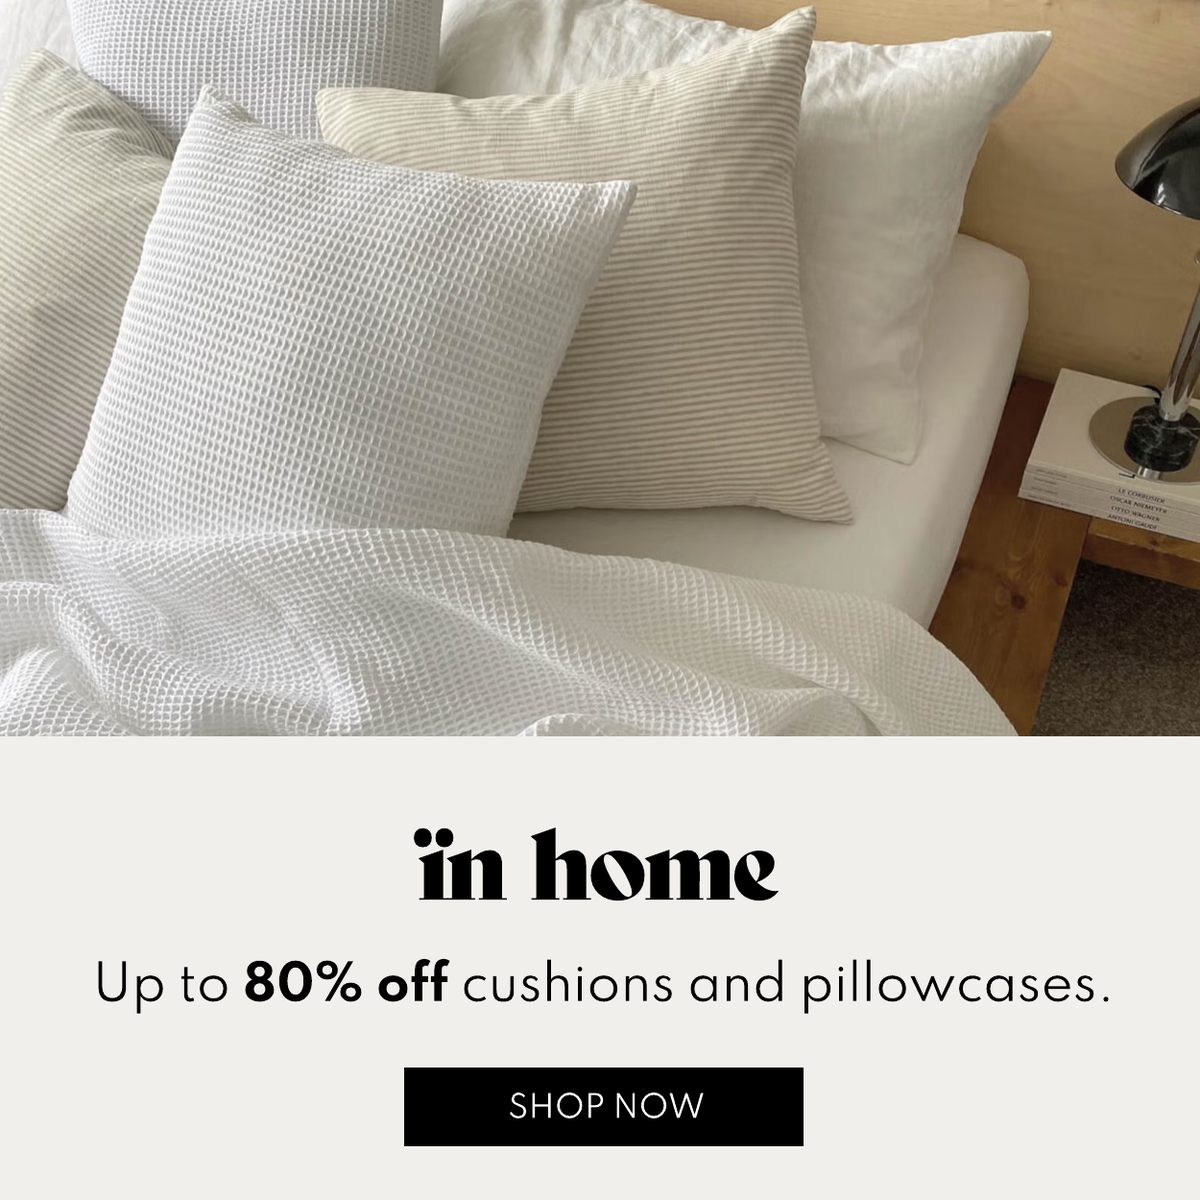 in home - up to 80% off